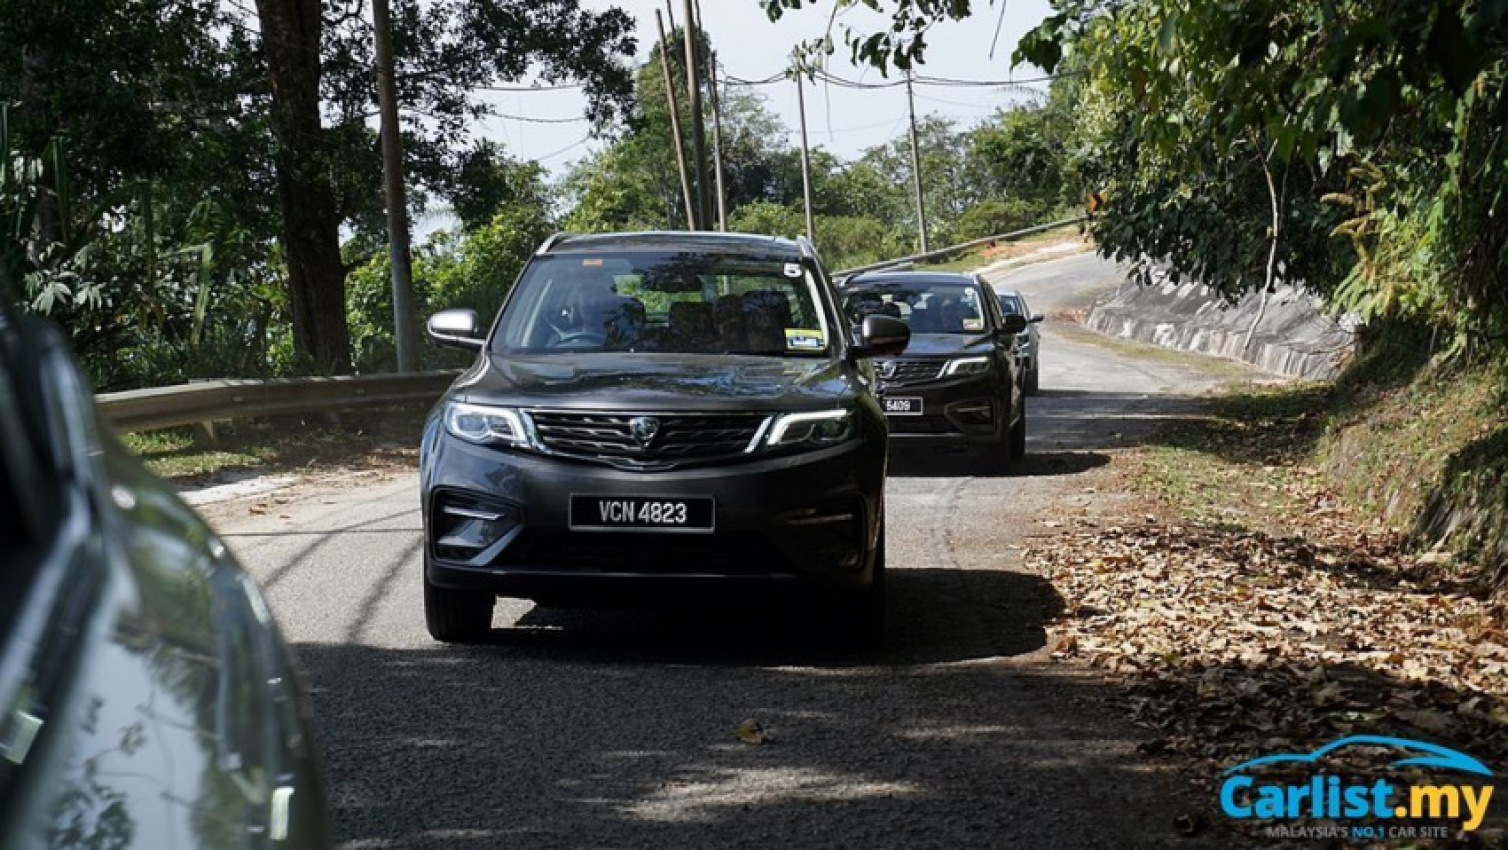 autos, cars, reviews, android, proton, proton x70, x70, android, review: proton x70 - is it worth the hype?